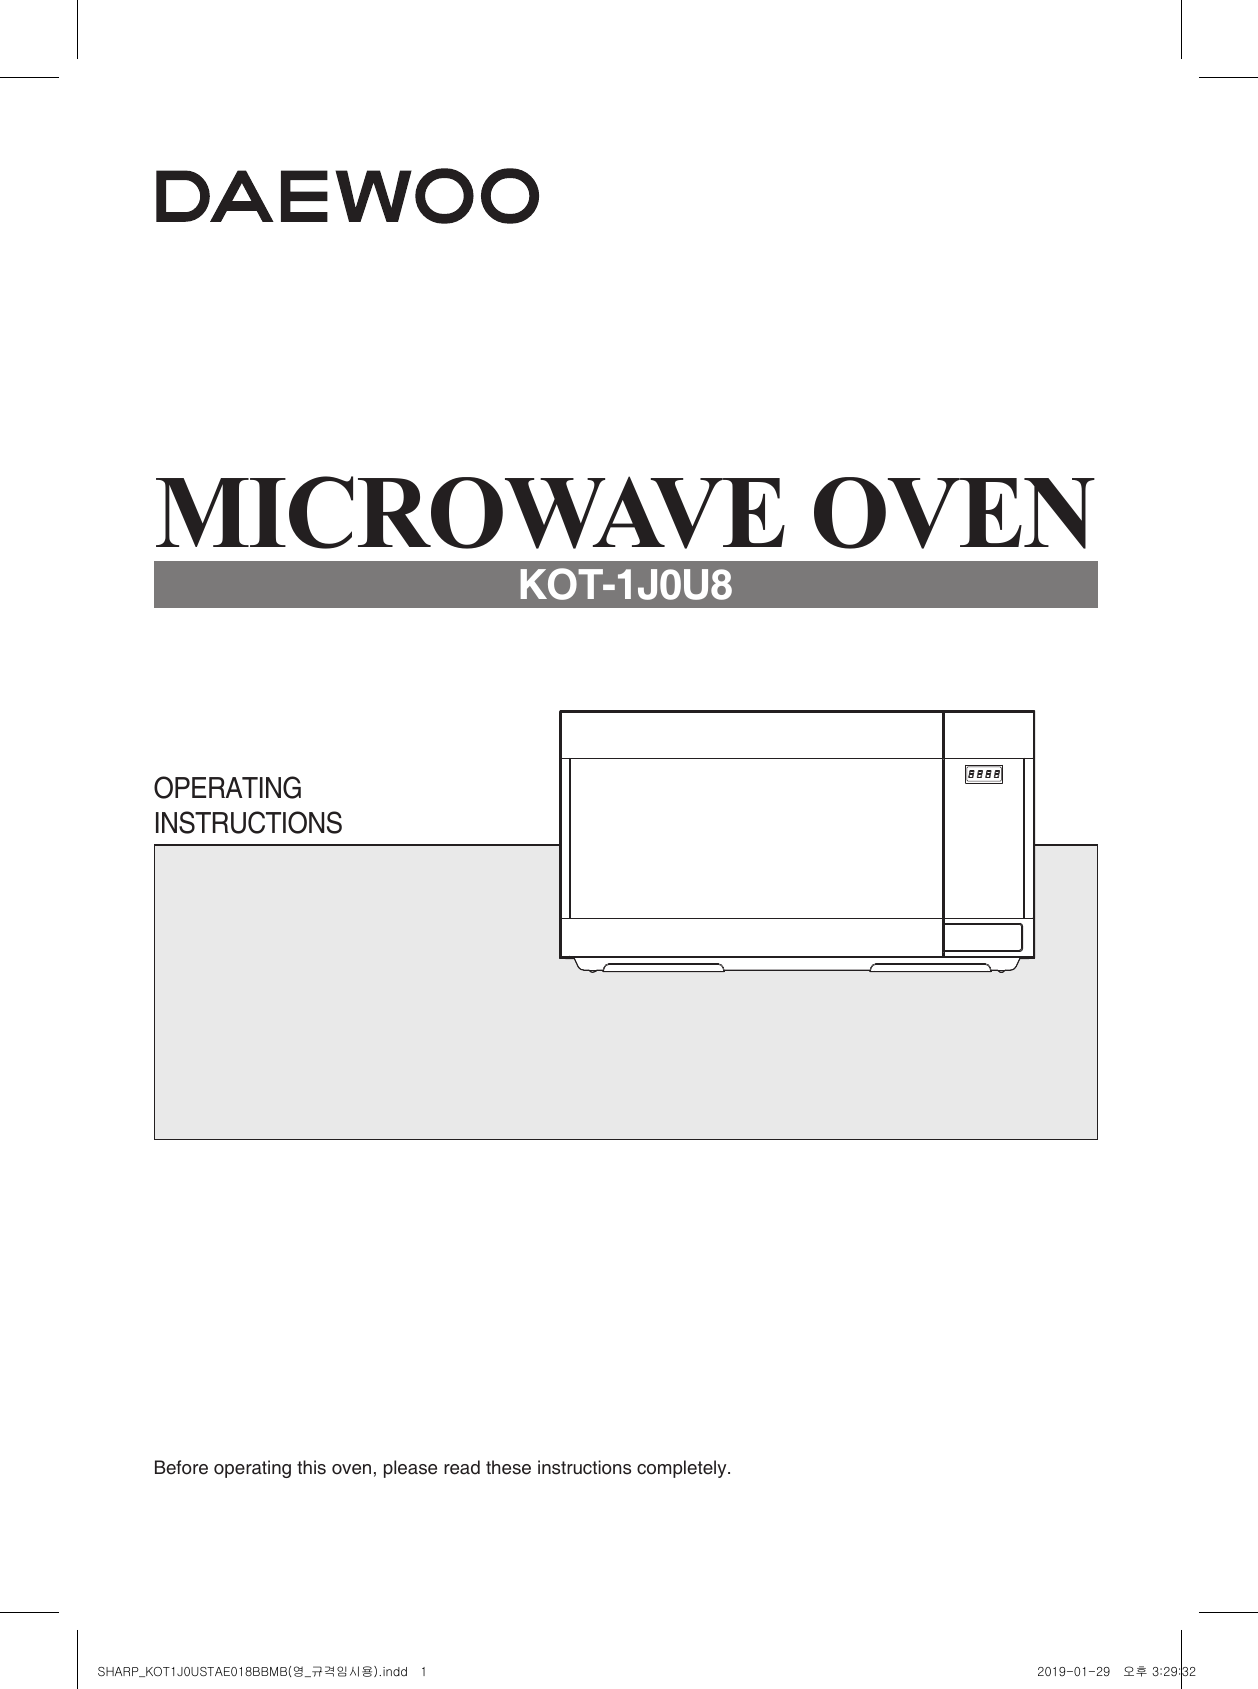 Before operating this oven, please read these instructions completely.OPERATING INSTRUCTIONSMICROWAVE OVENKOT-1J0U8SHARP_KOT1J0USTAE018BBMB(영_규격임시용).indd   1 2019-01-29   오후 3:29:32